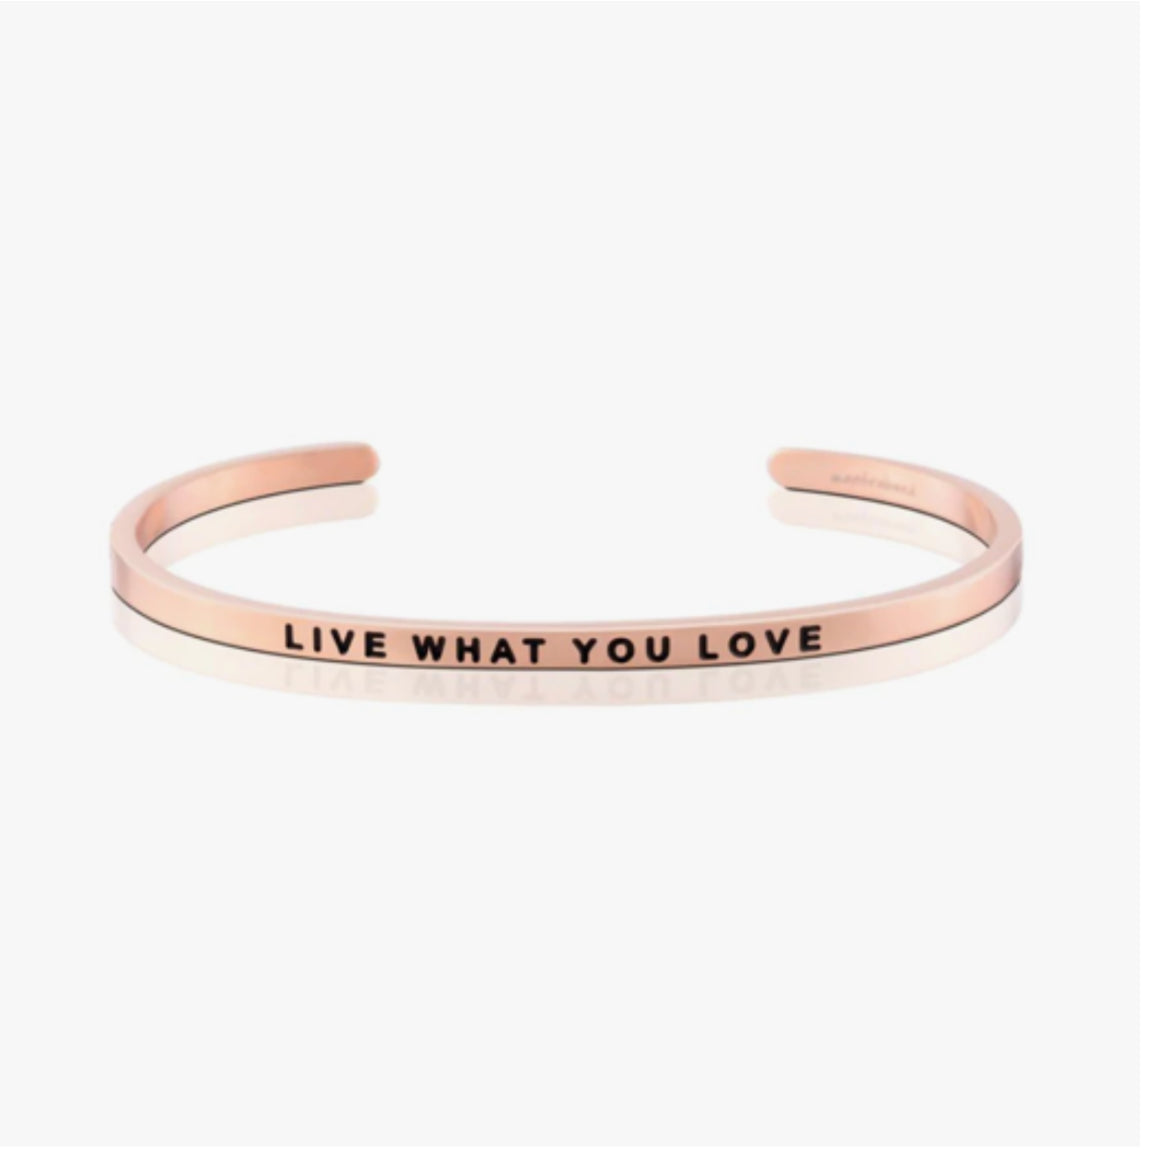 Live What You Love MantraBand